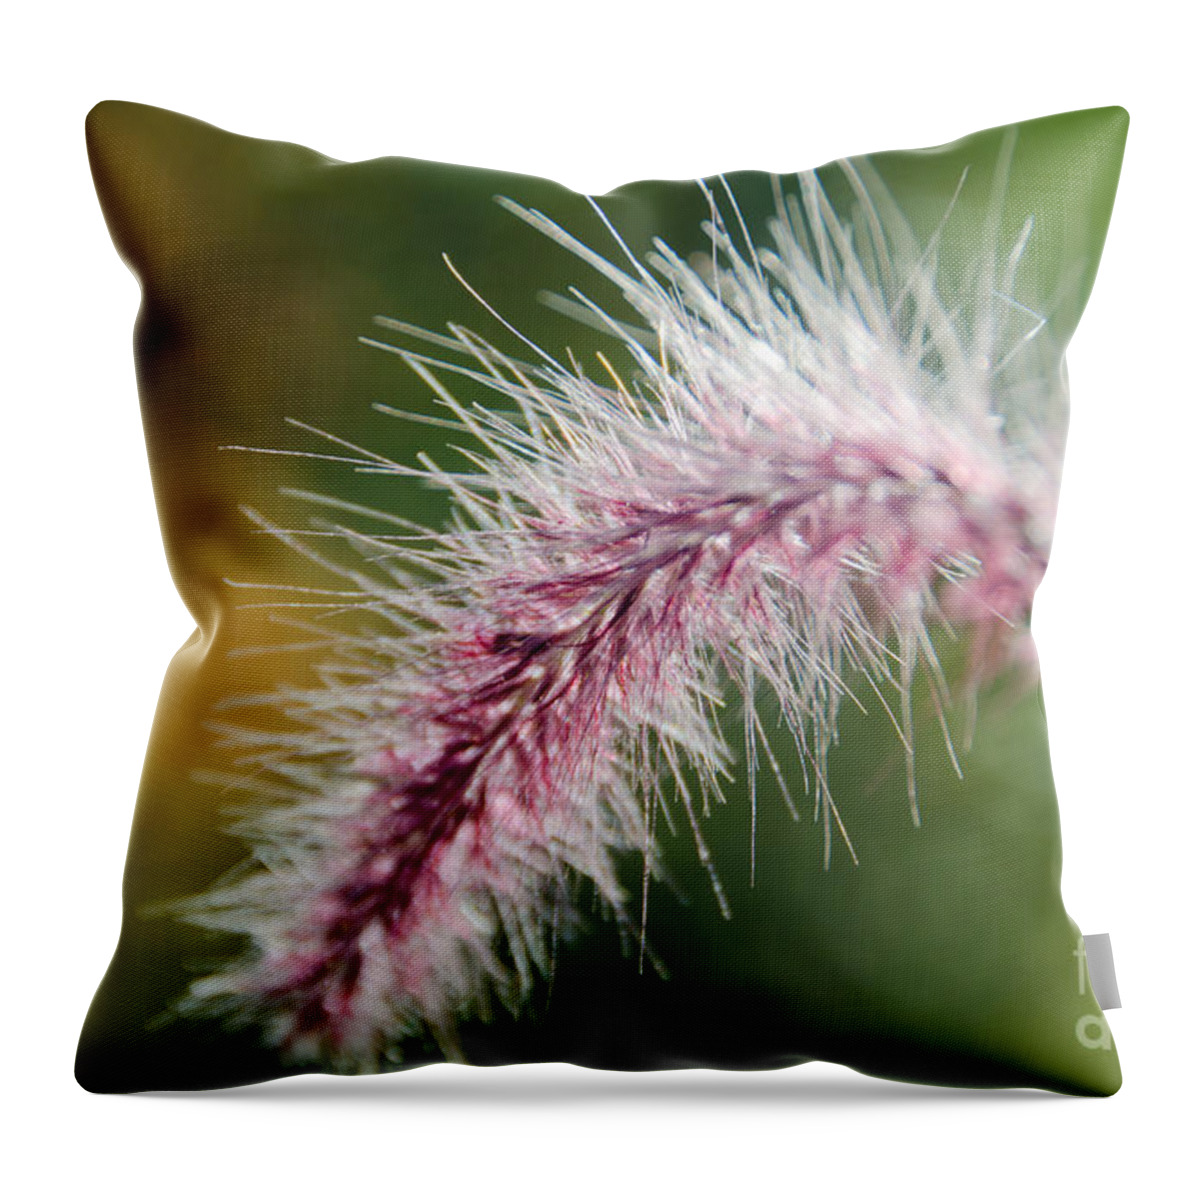 Purple Throw Pillow featuring the photograph Purple Fountain Grass 3 by Cassie Marie Photography